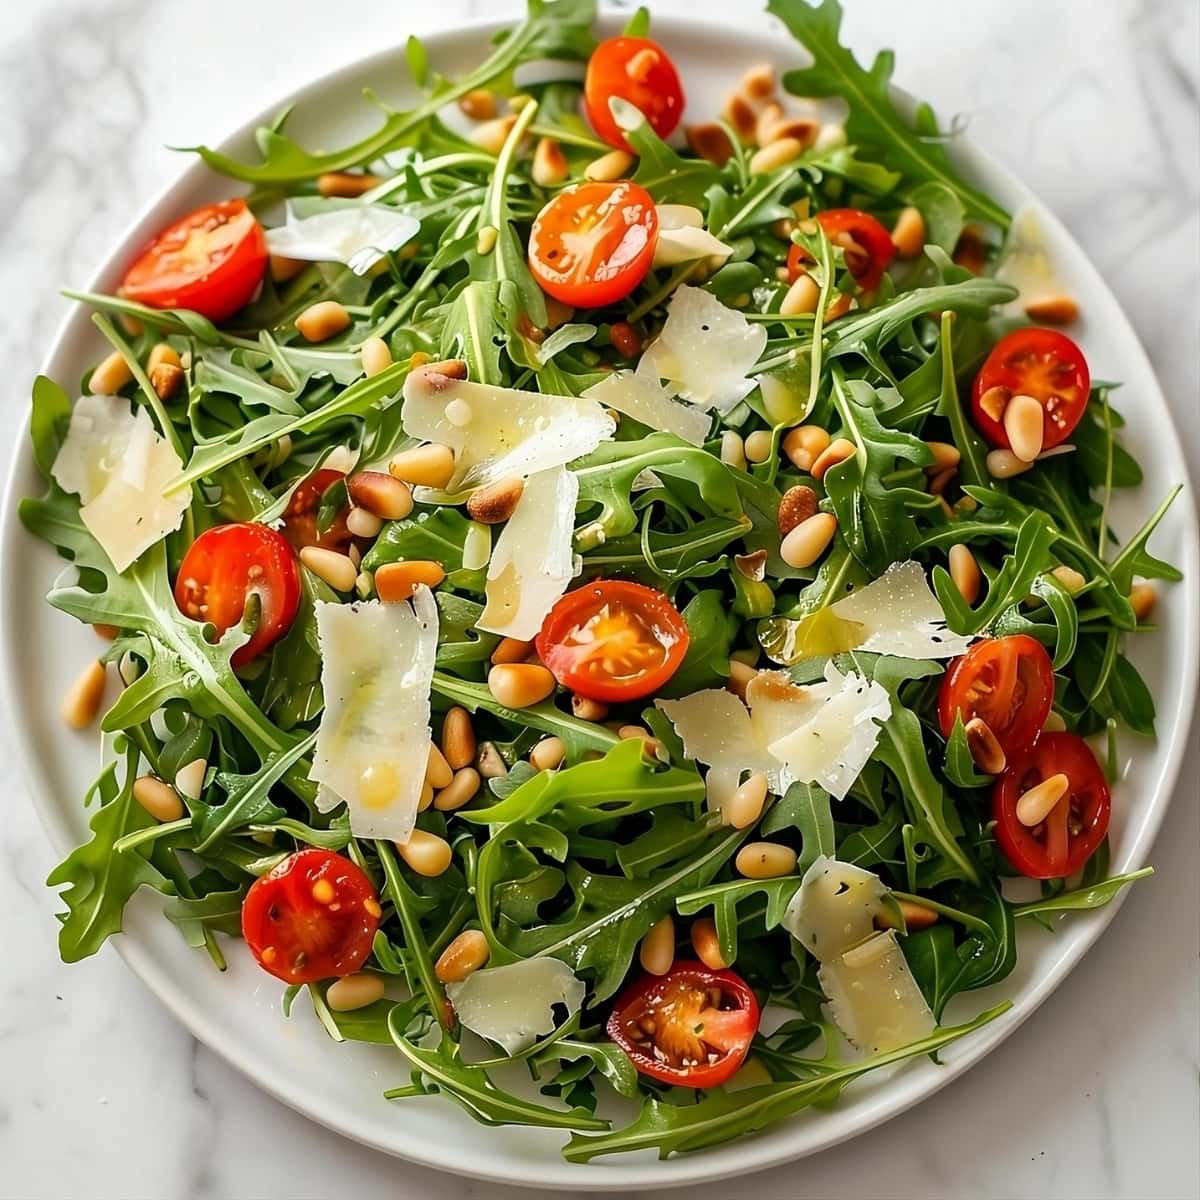 Arugula salad with cherry tomatoes, arugula and roasted pine nuts drizzled with lemon dressing garnished with shaved parmesan cheese.